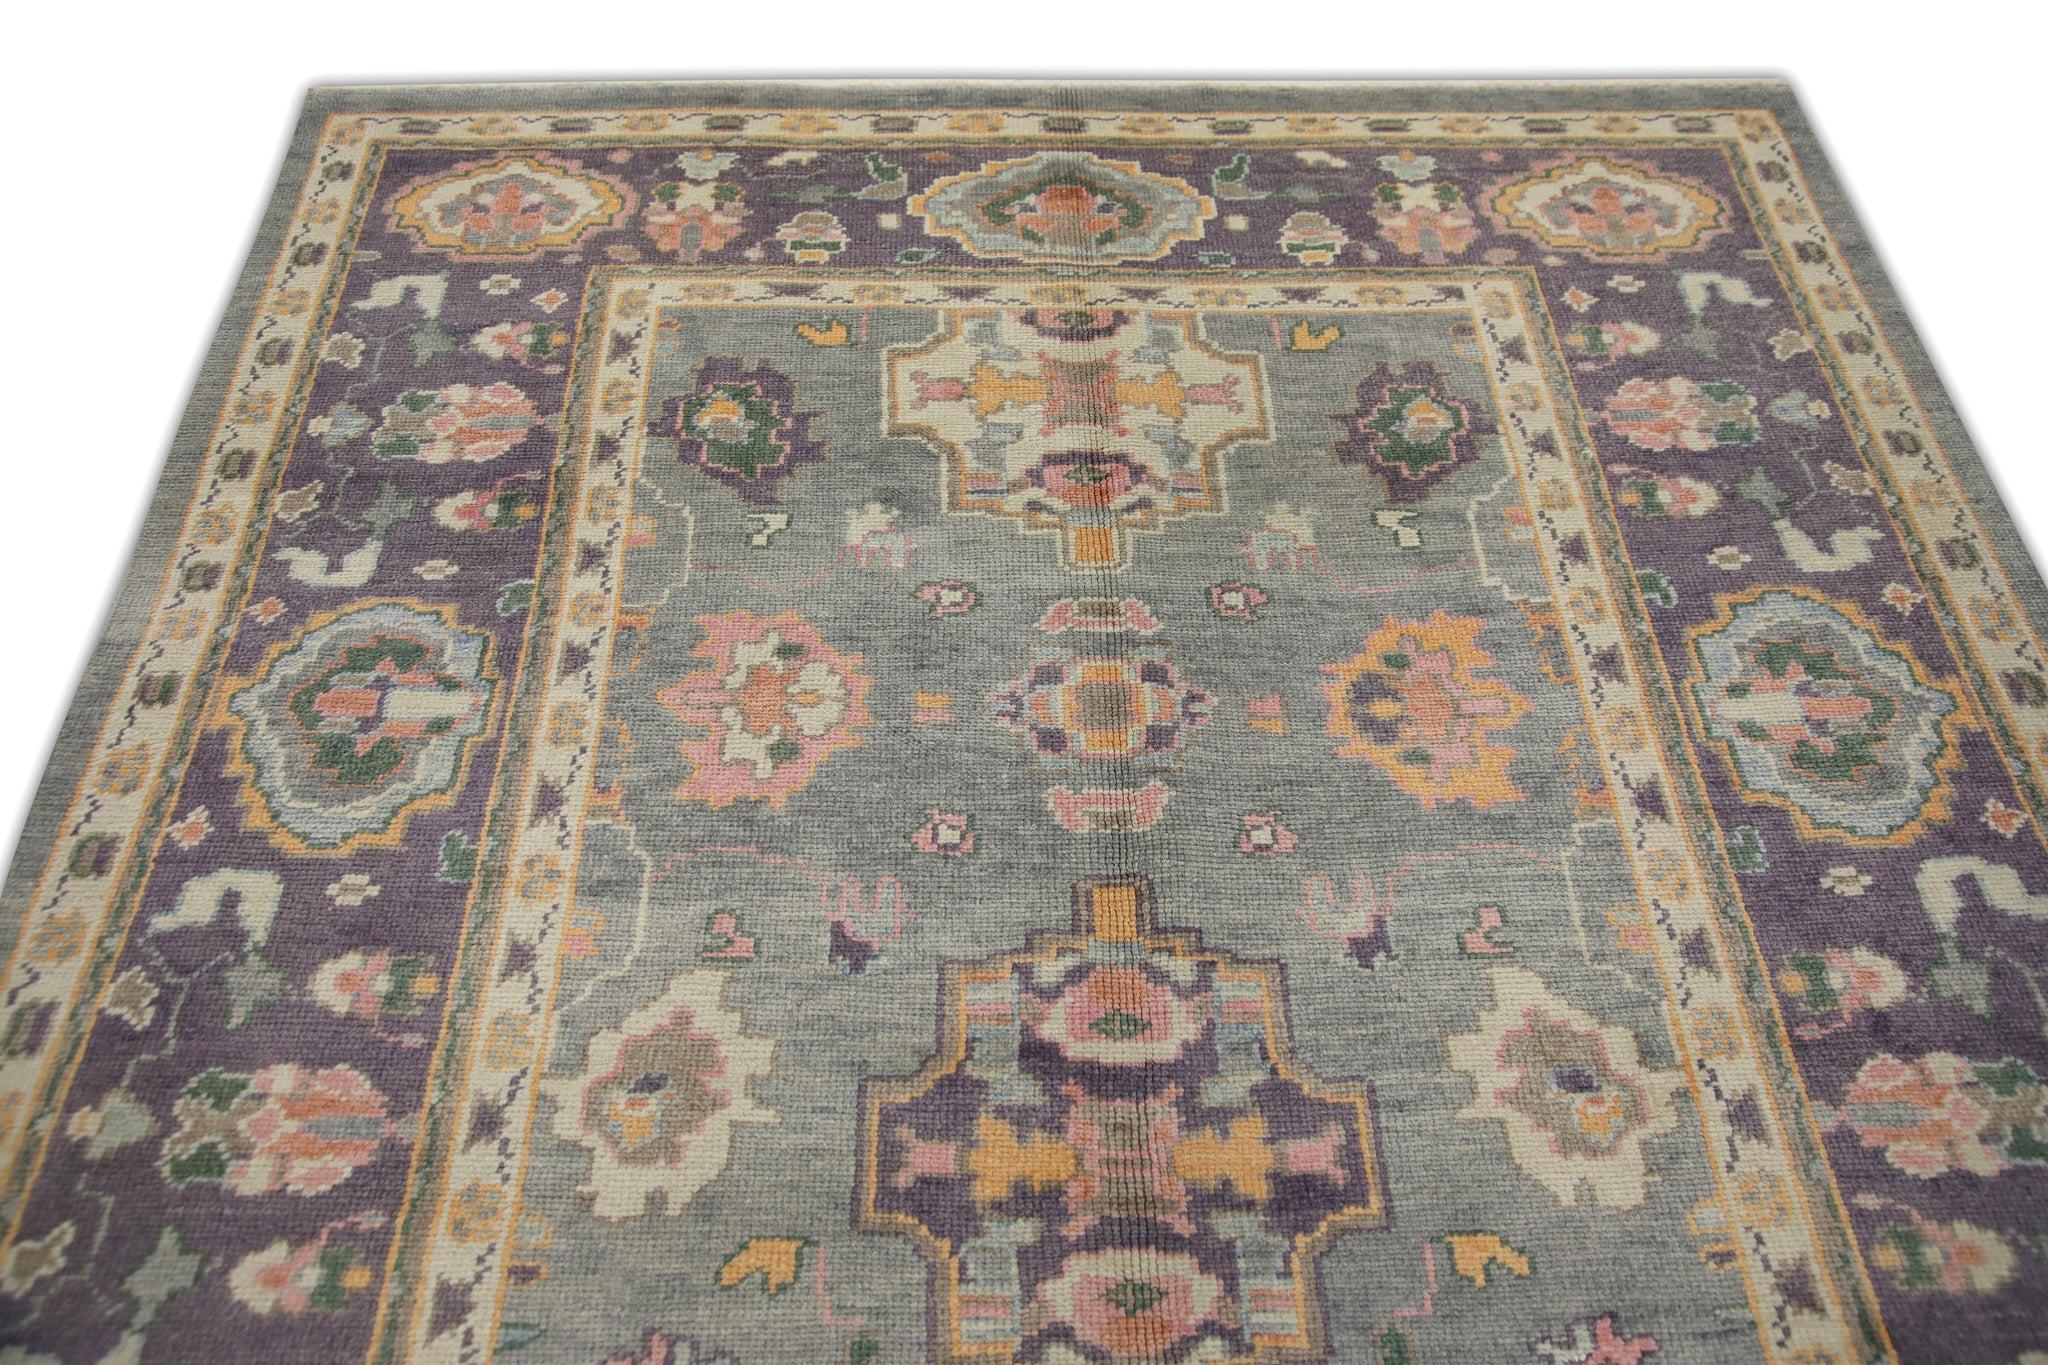 Purple and Pink Floral Design Handwoven Wool Turkish Oushak Rug 6'4